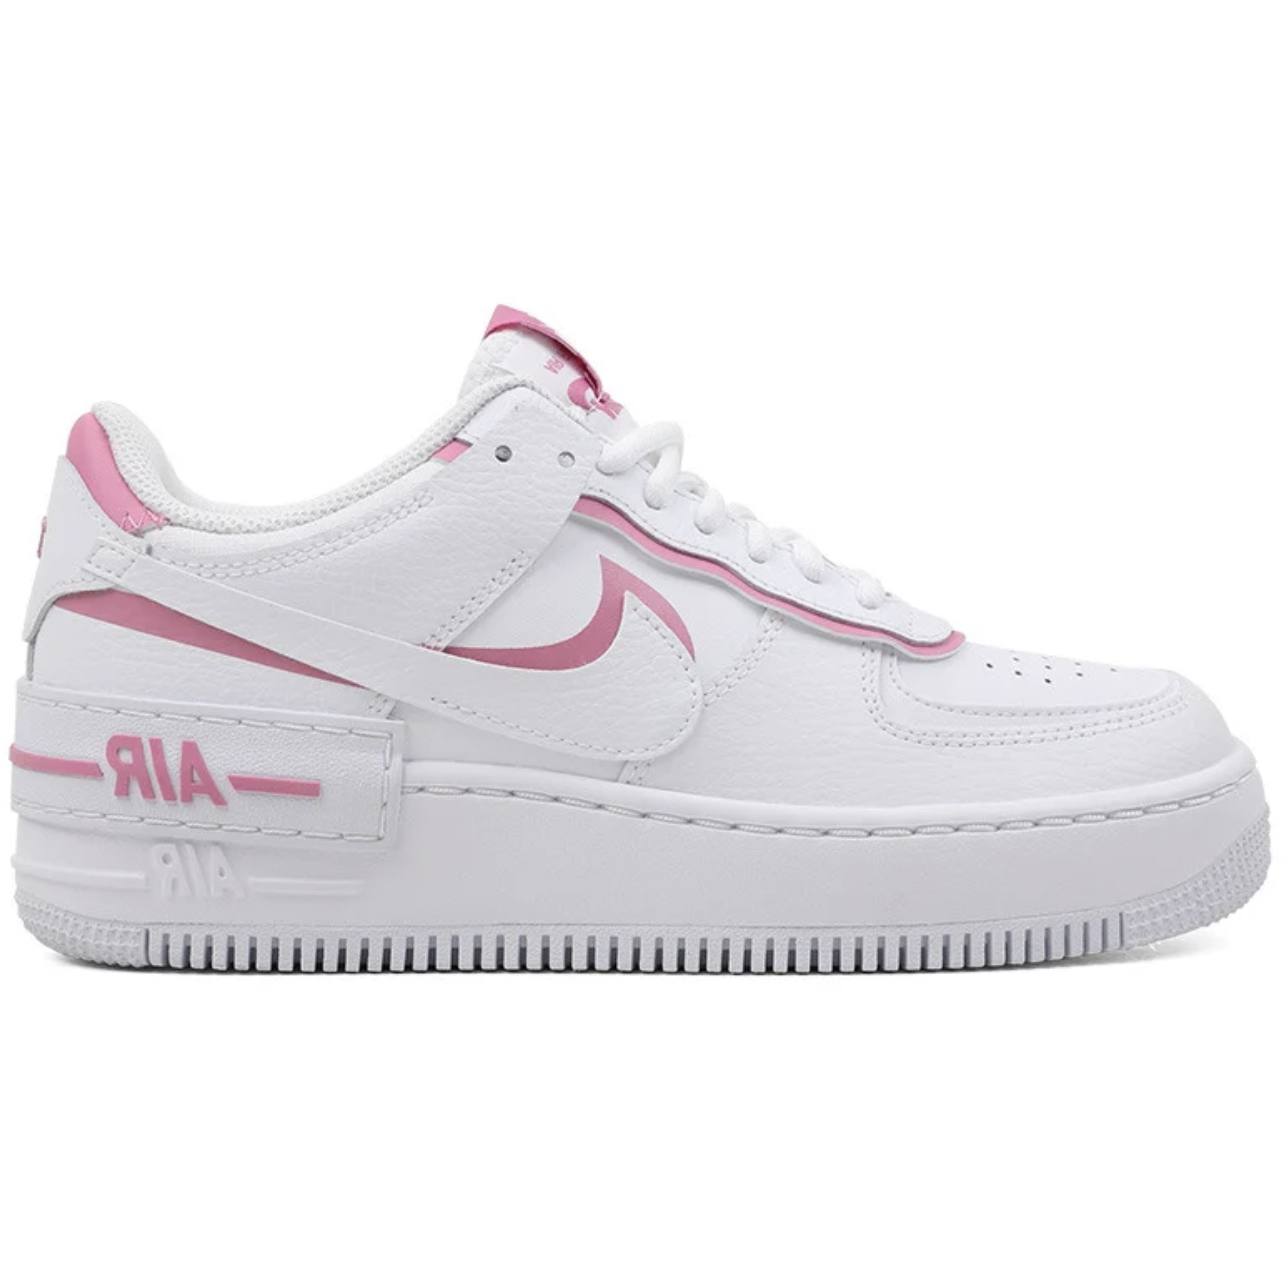 AIR FORCE 1 SHADOW WHITE / PINK